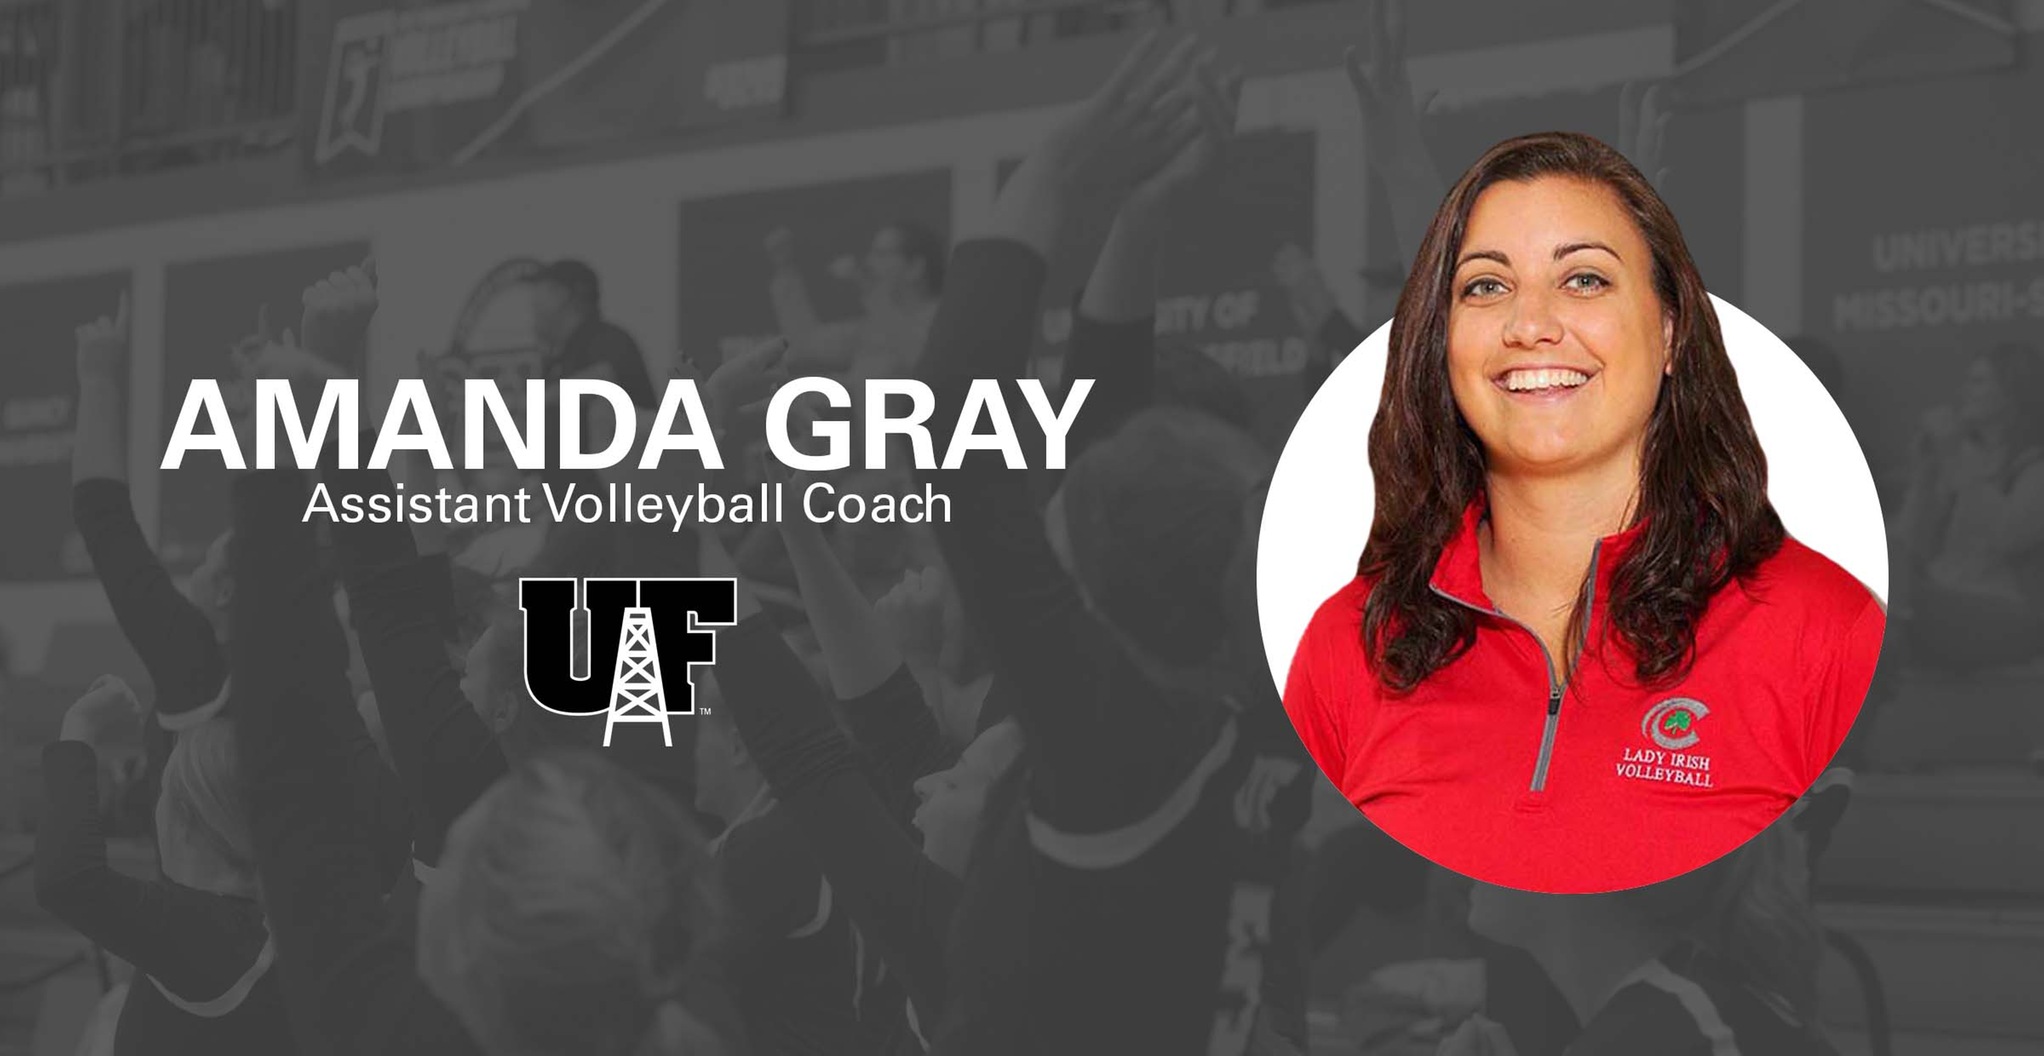 Gray Hired as Assistant Volleyball Coach